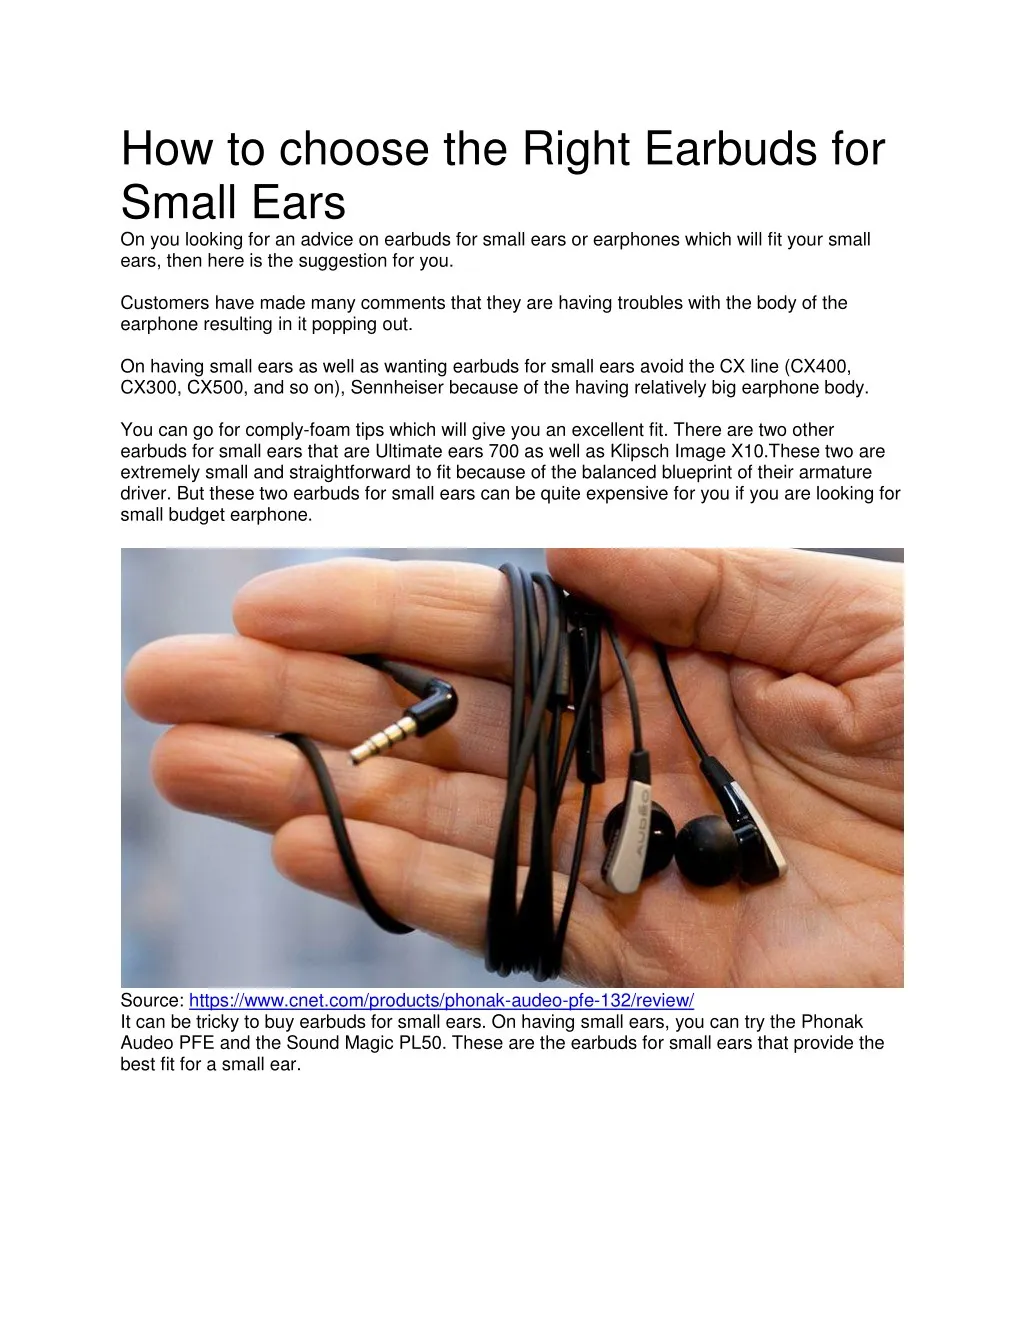 how to choose the right earbuds for small ears